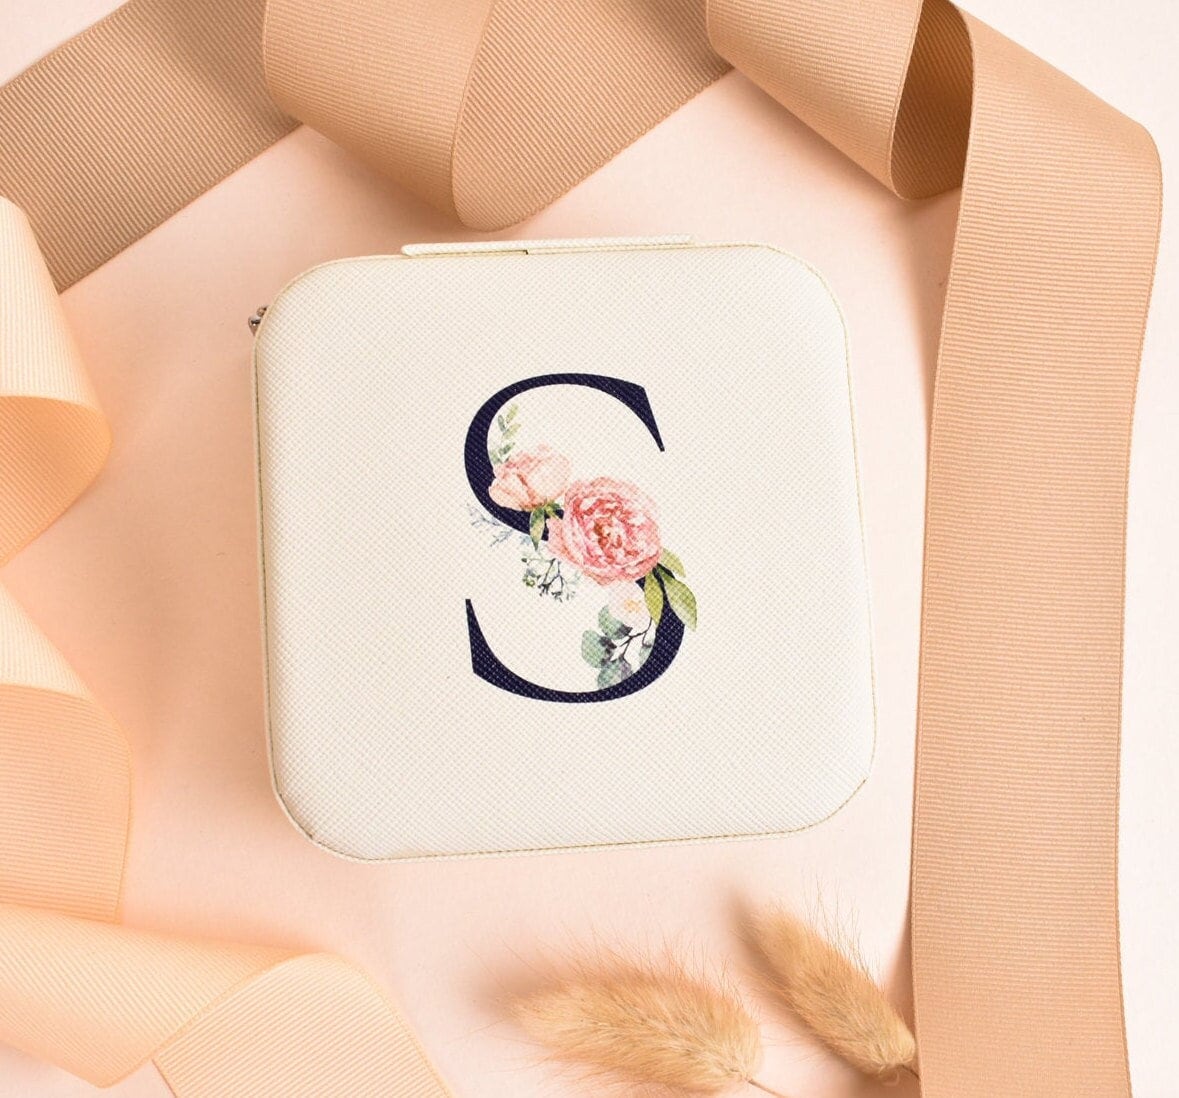 Personalized Bridesmaid Gifts Unique Monogram Gifts for Her Personalized Gifts for Women Jewelry Box Monogrammed Gift Ideas Maid Of Honor